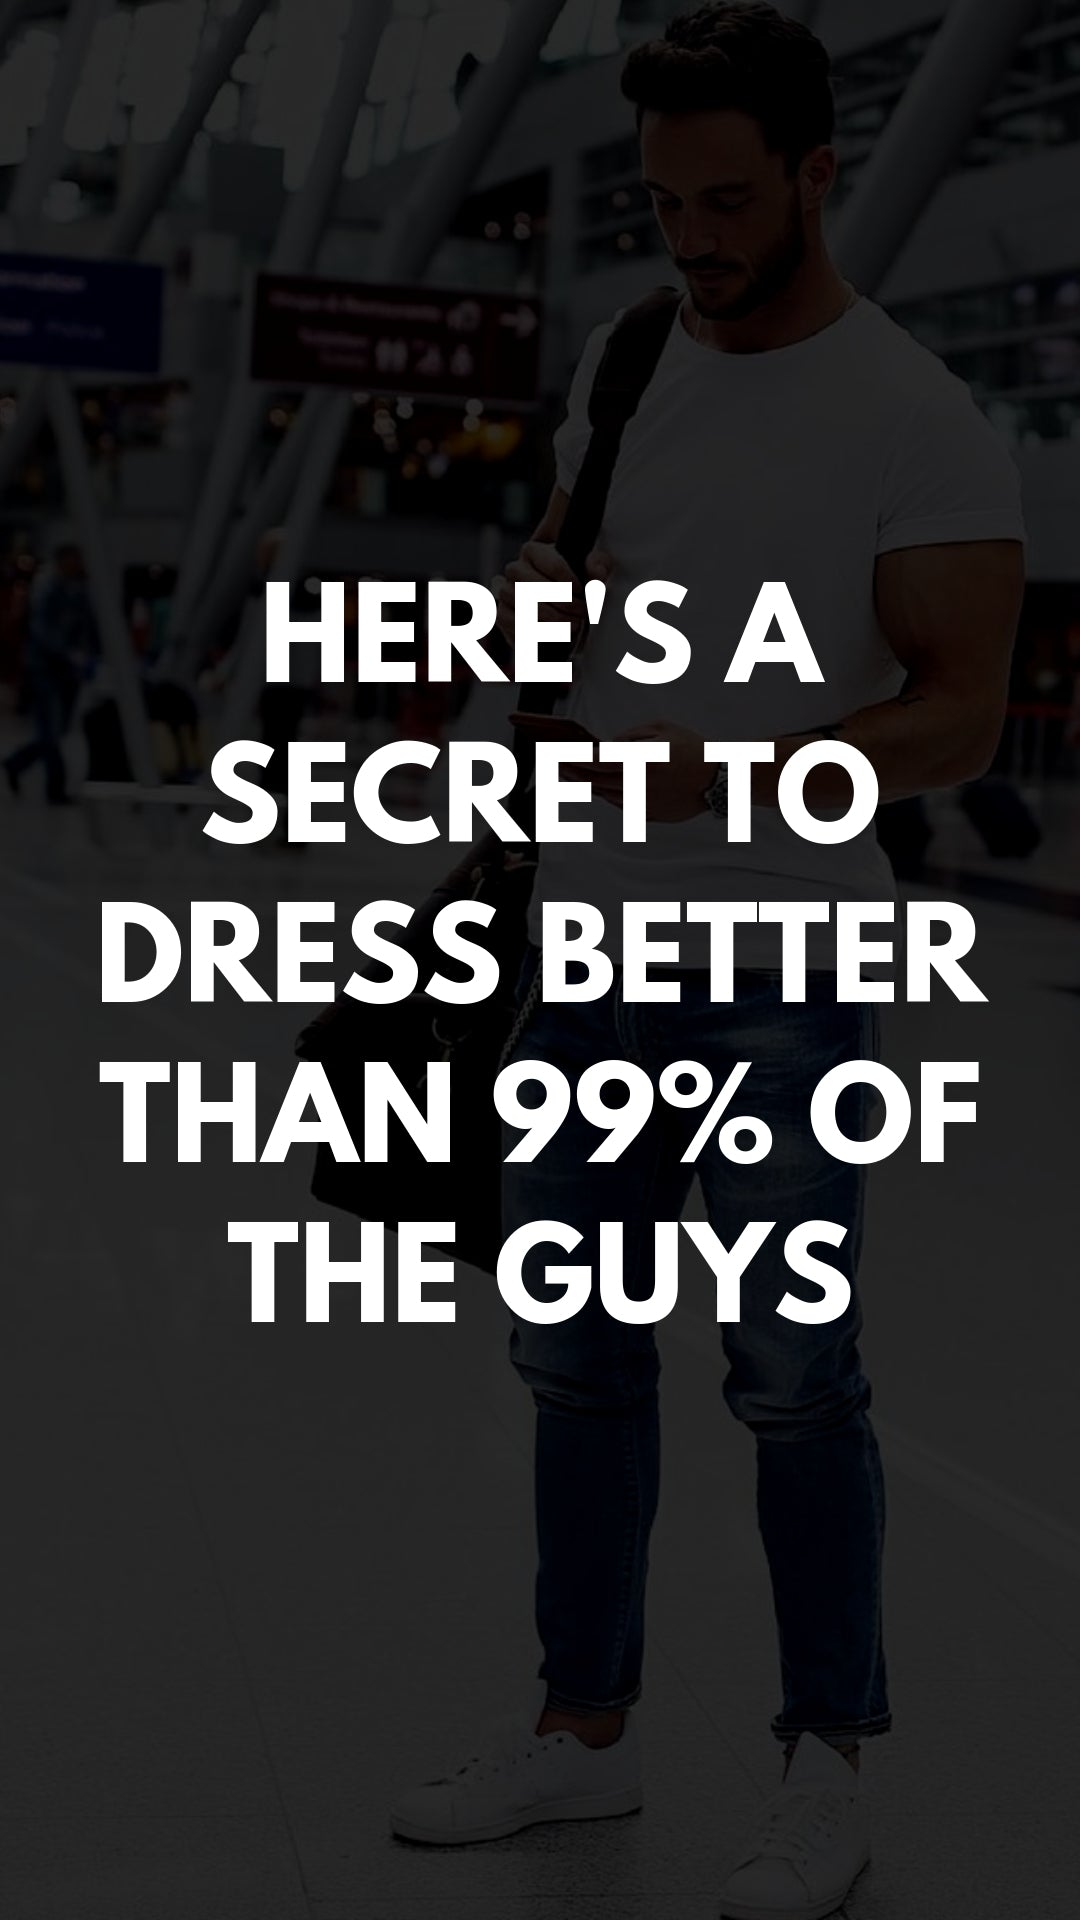 How To Dress Better Than 99% Of Guys? Here's a Secret  #mensfashion #streetstyle 